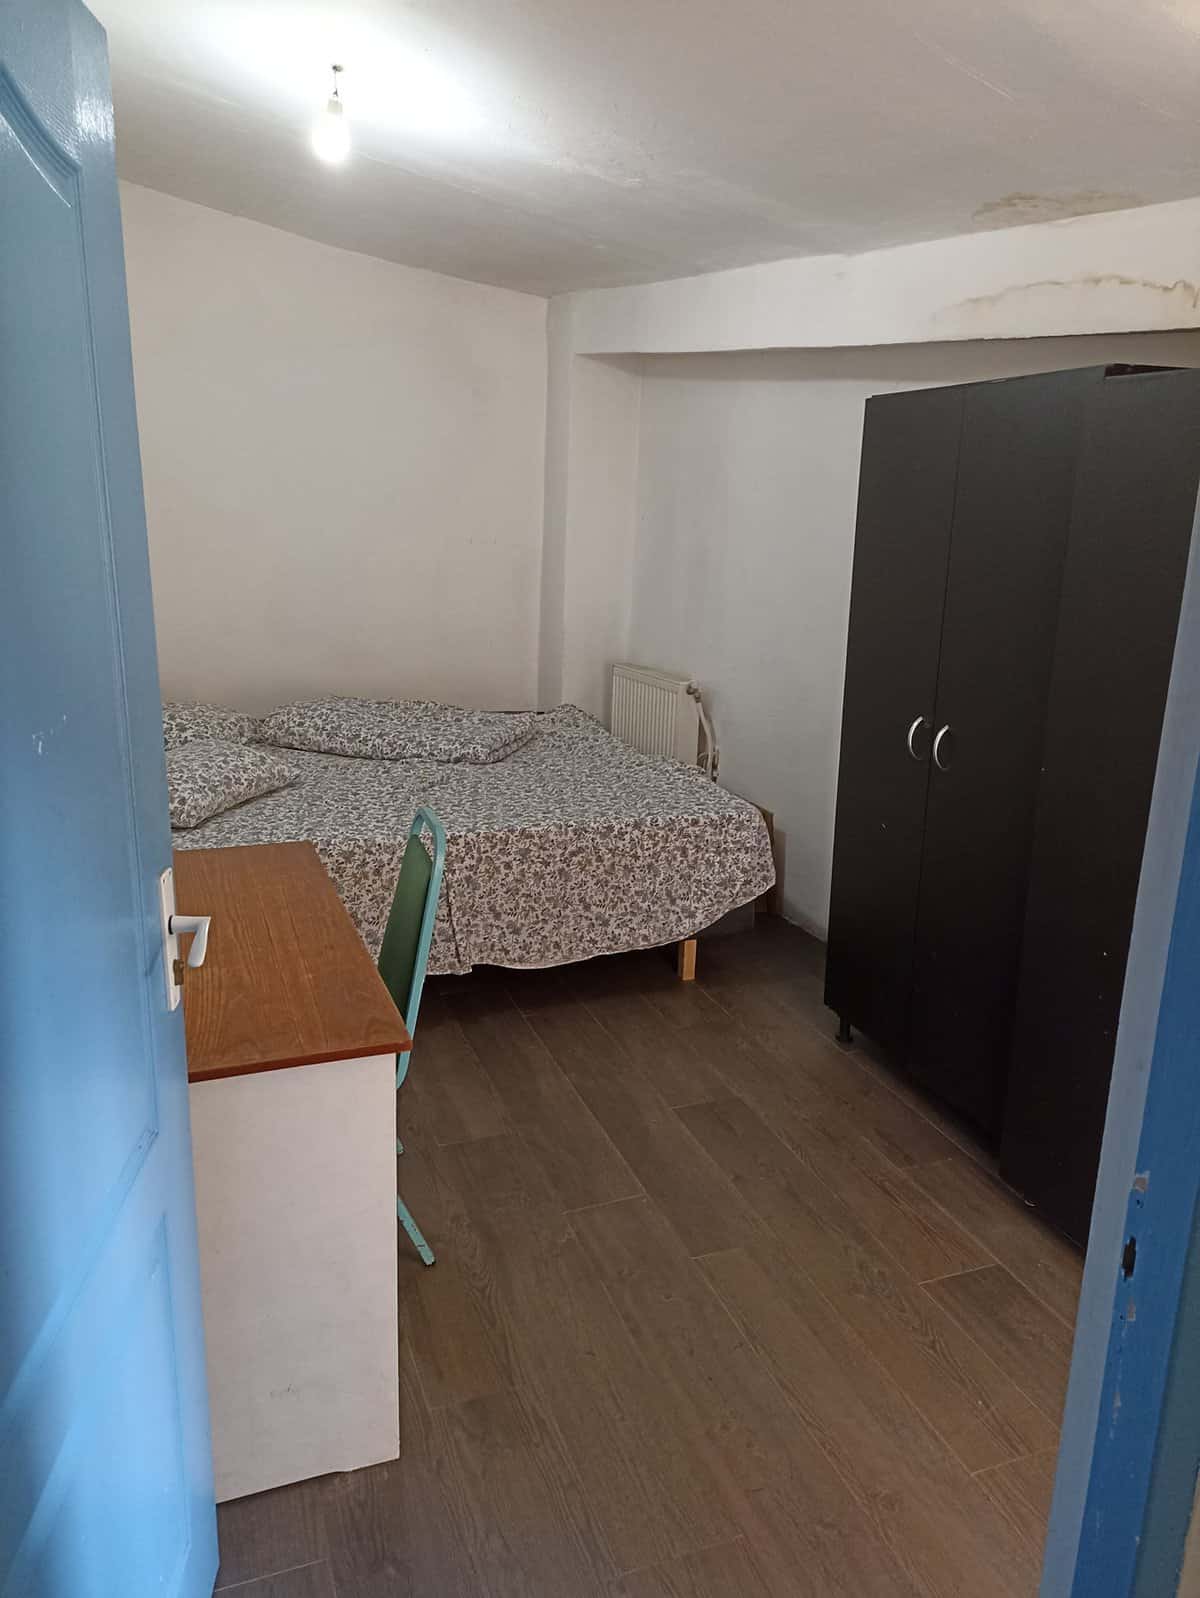 May be an image of bedroom